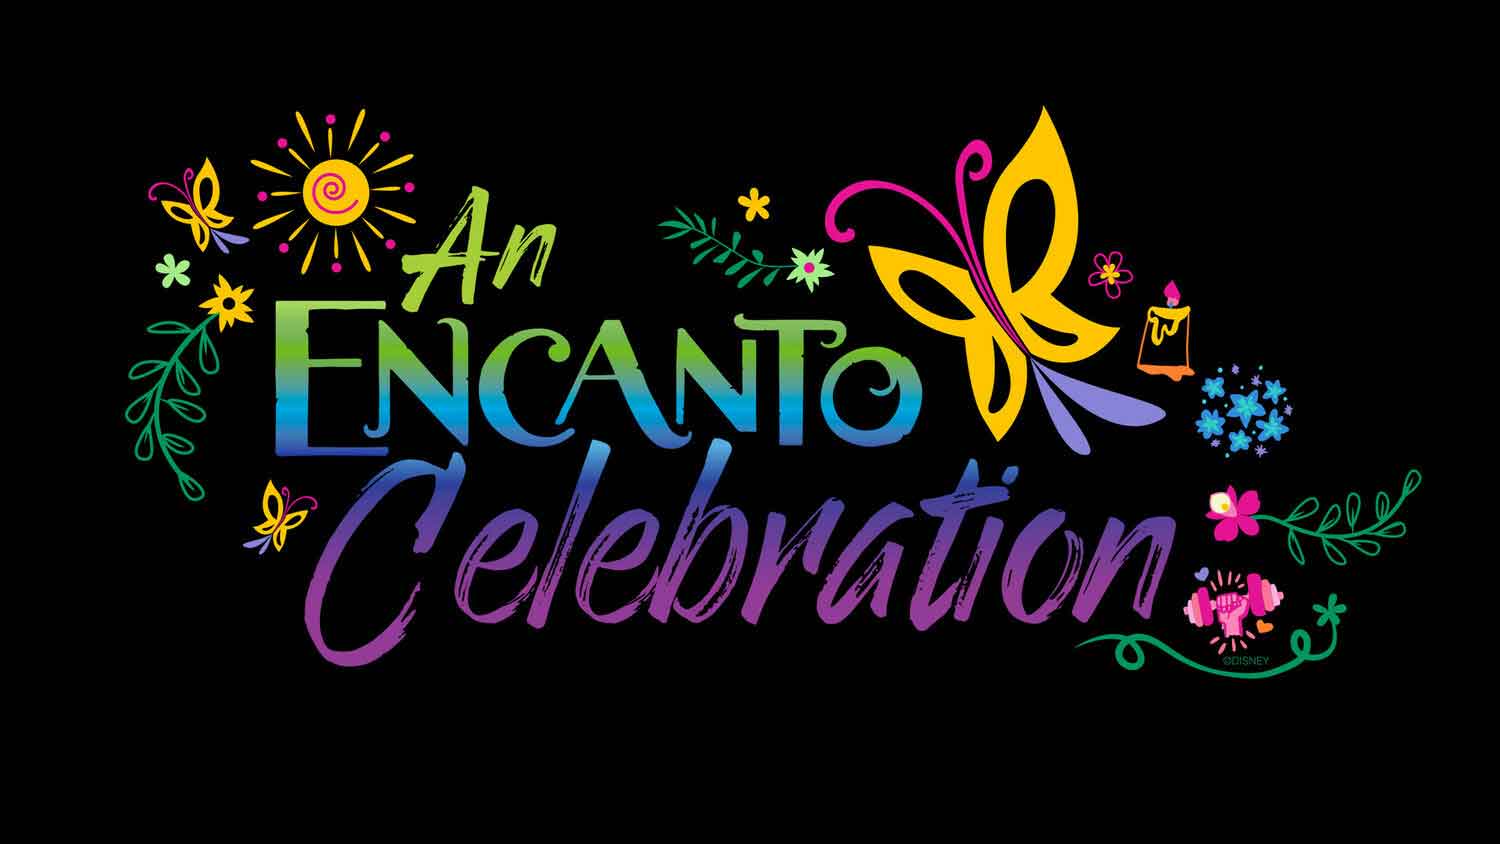 Disney Cruise Line guests can join the fantastical family Madrigal during an “An Encanto Celebration” aboard the Disney Magic. Designed to engage families through music, crafts and storytelling, the interactive experience includes the opportunity to meet and take photos with Mirabel and Bruno from Walt Disney Animation Studios’ “Encanto.” (Disney)